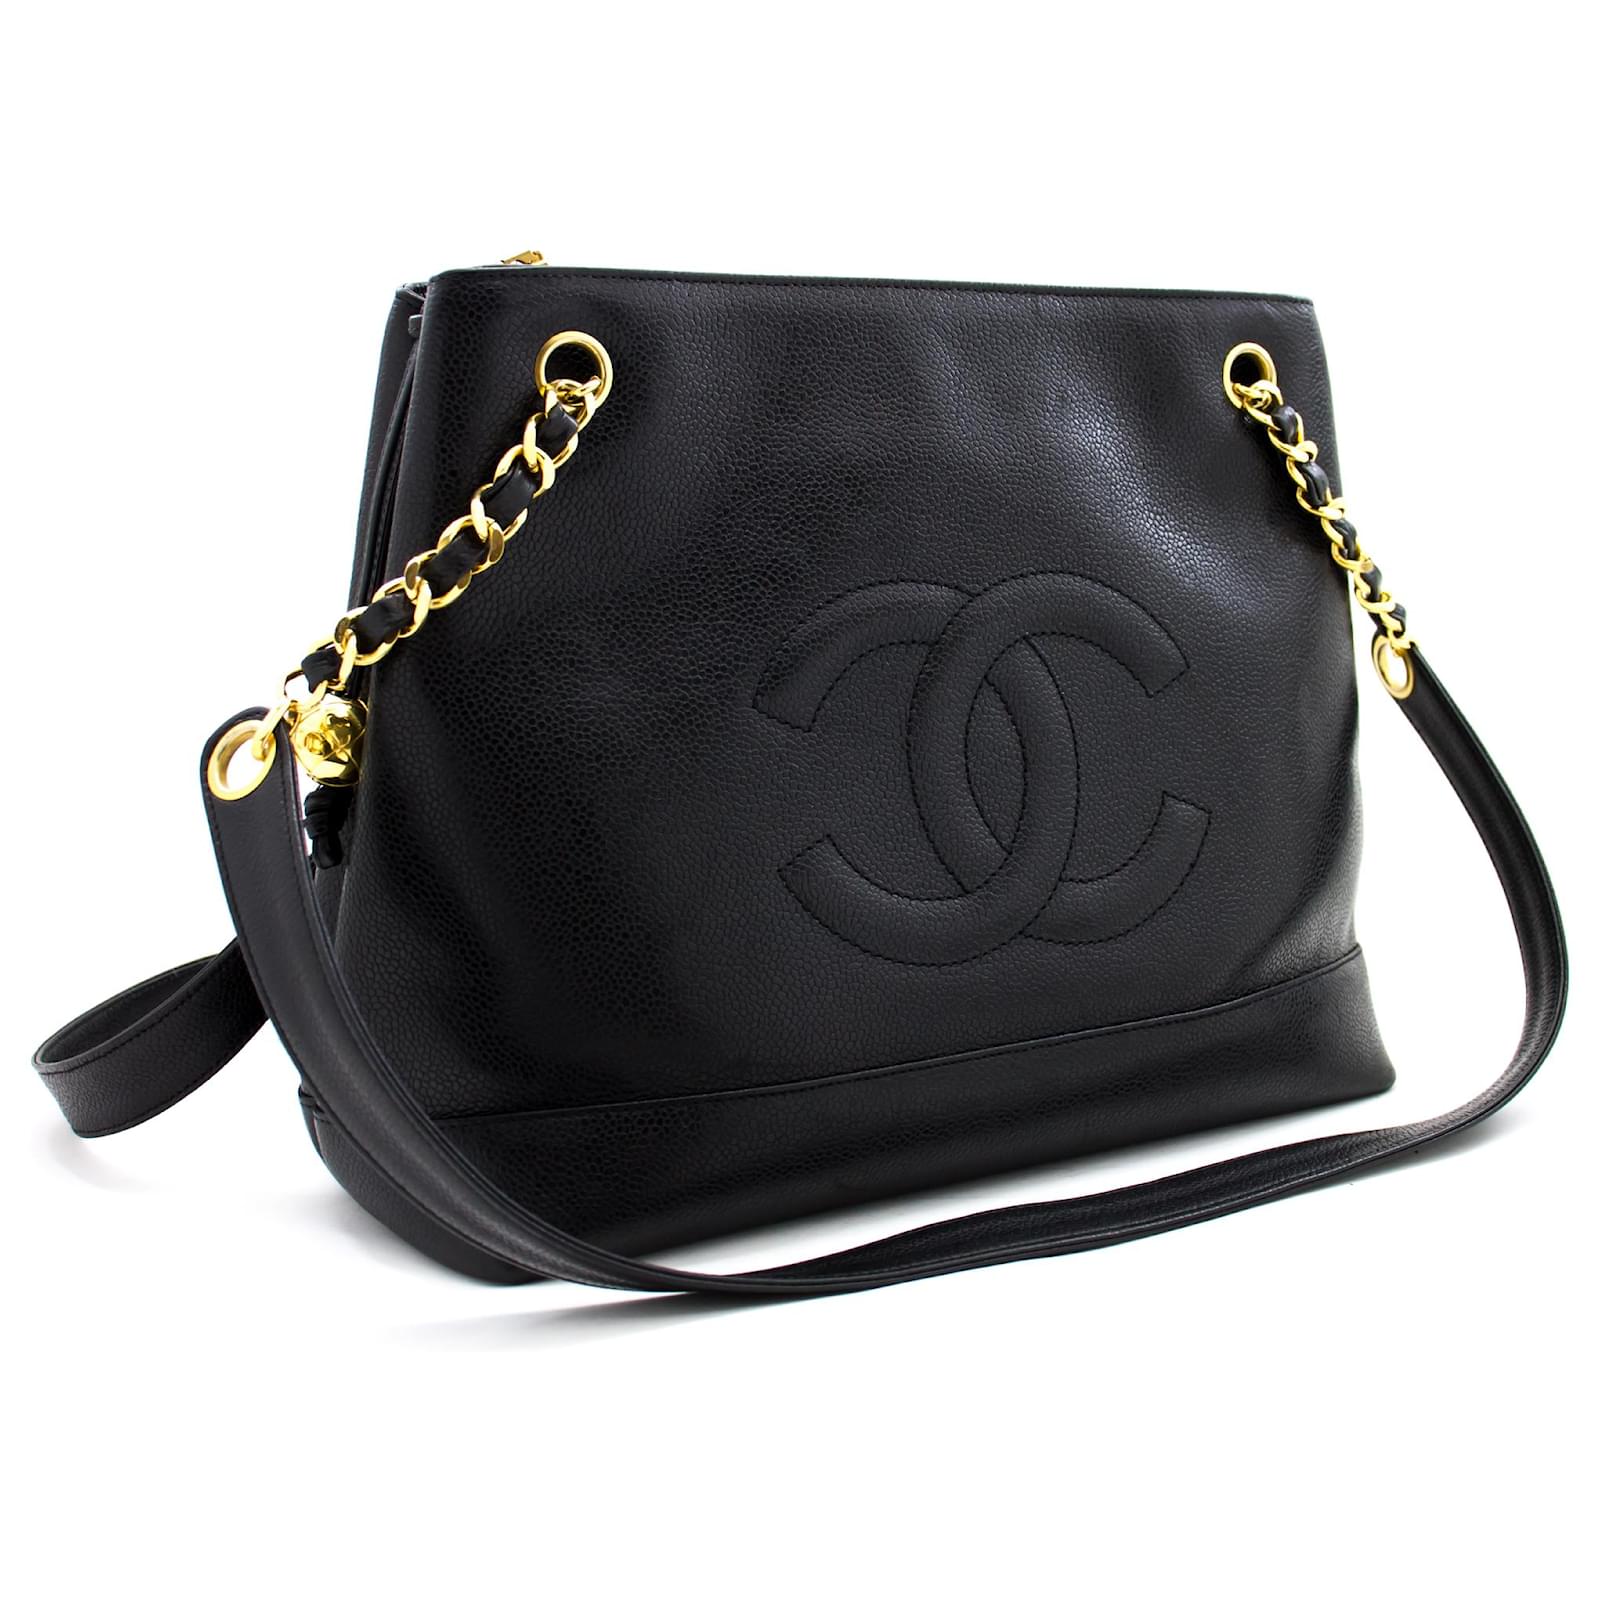 AUTHENTIC CHANEL ZIPPER POUCH WITH BAG